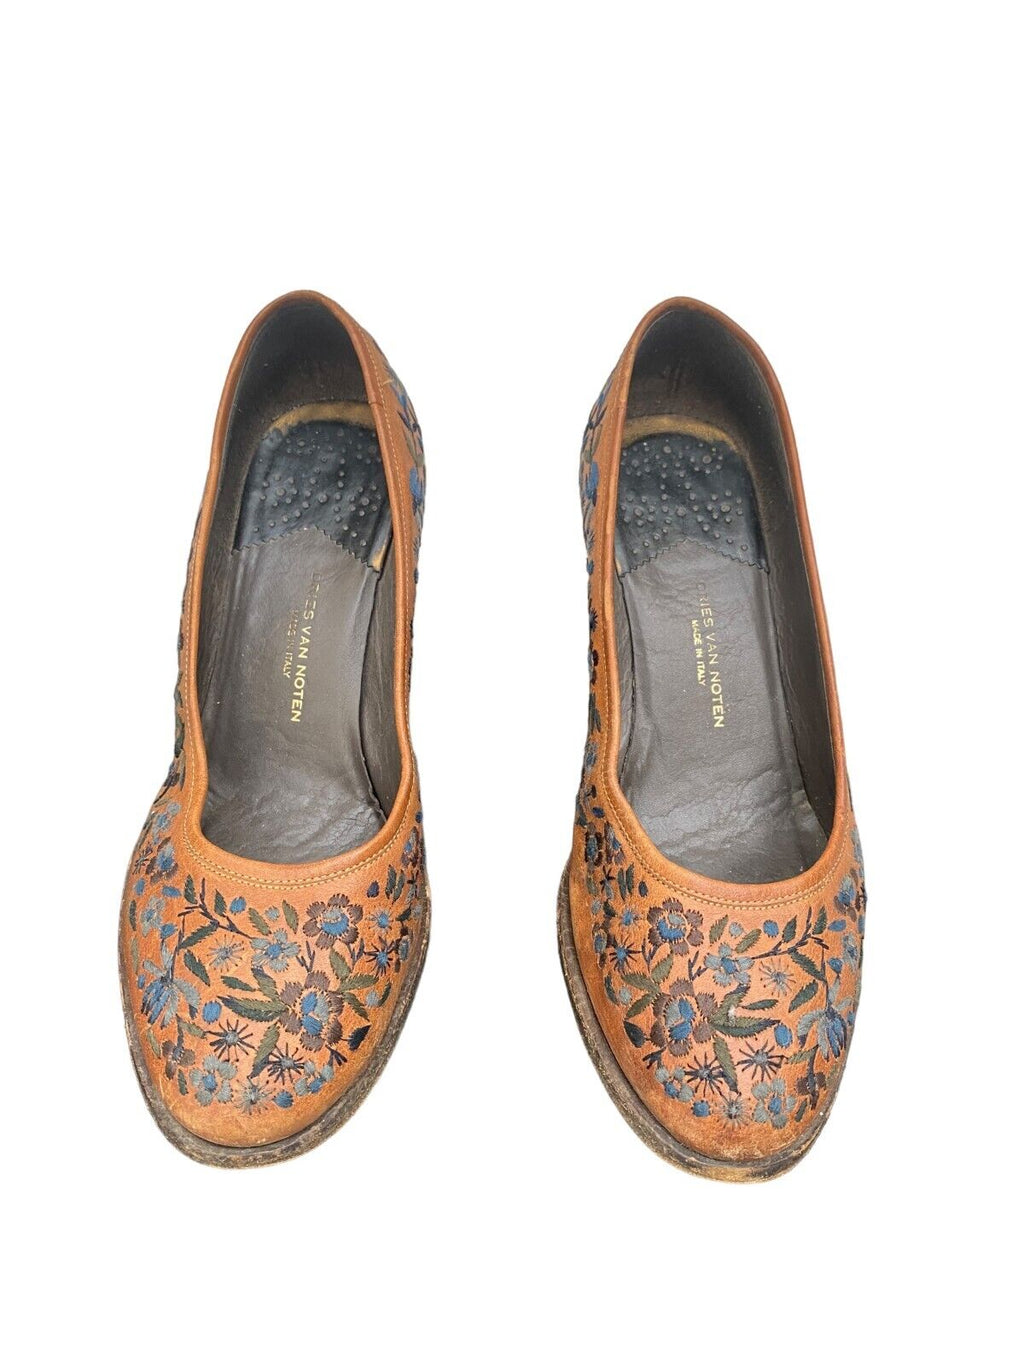 Embroidered Leather Shoes Heels